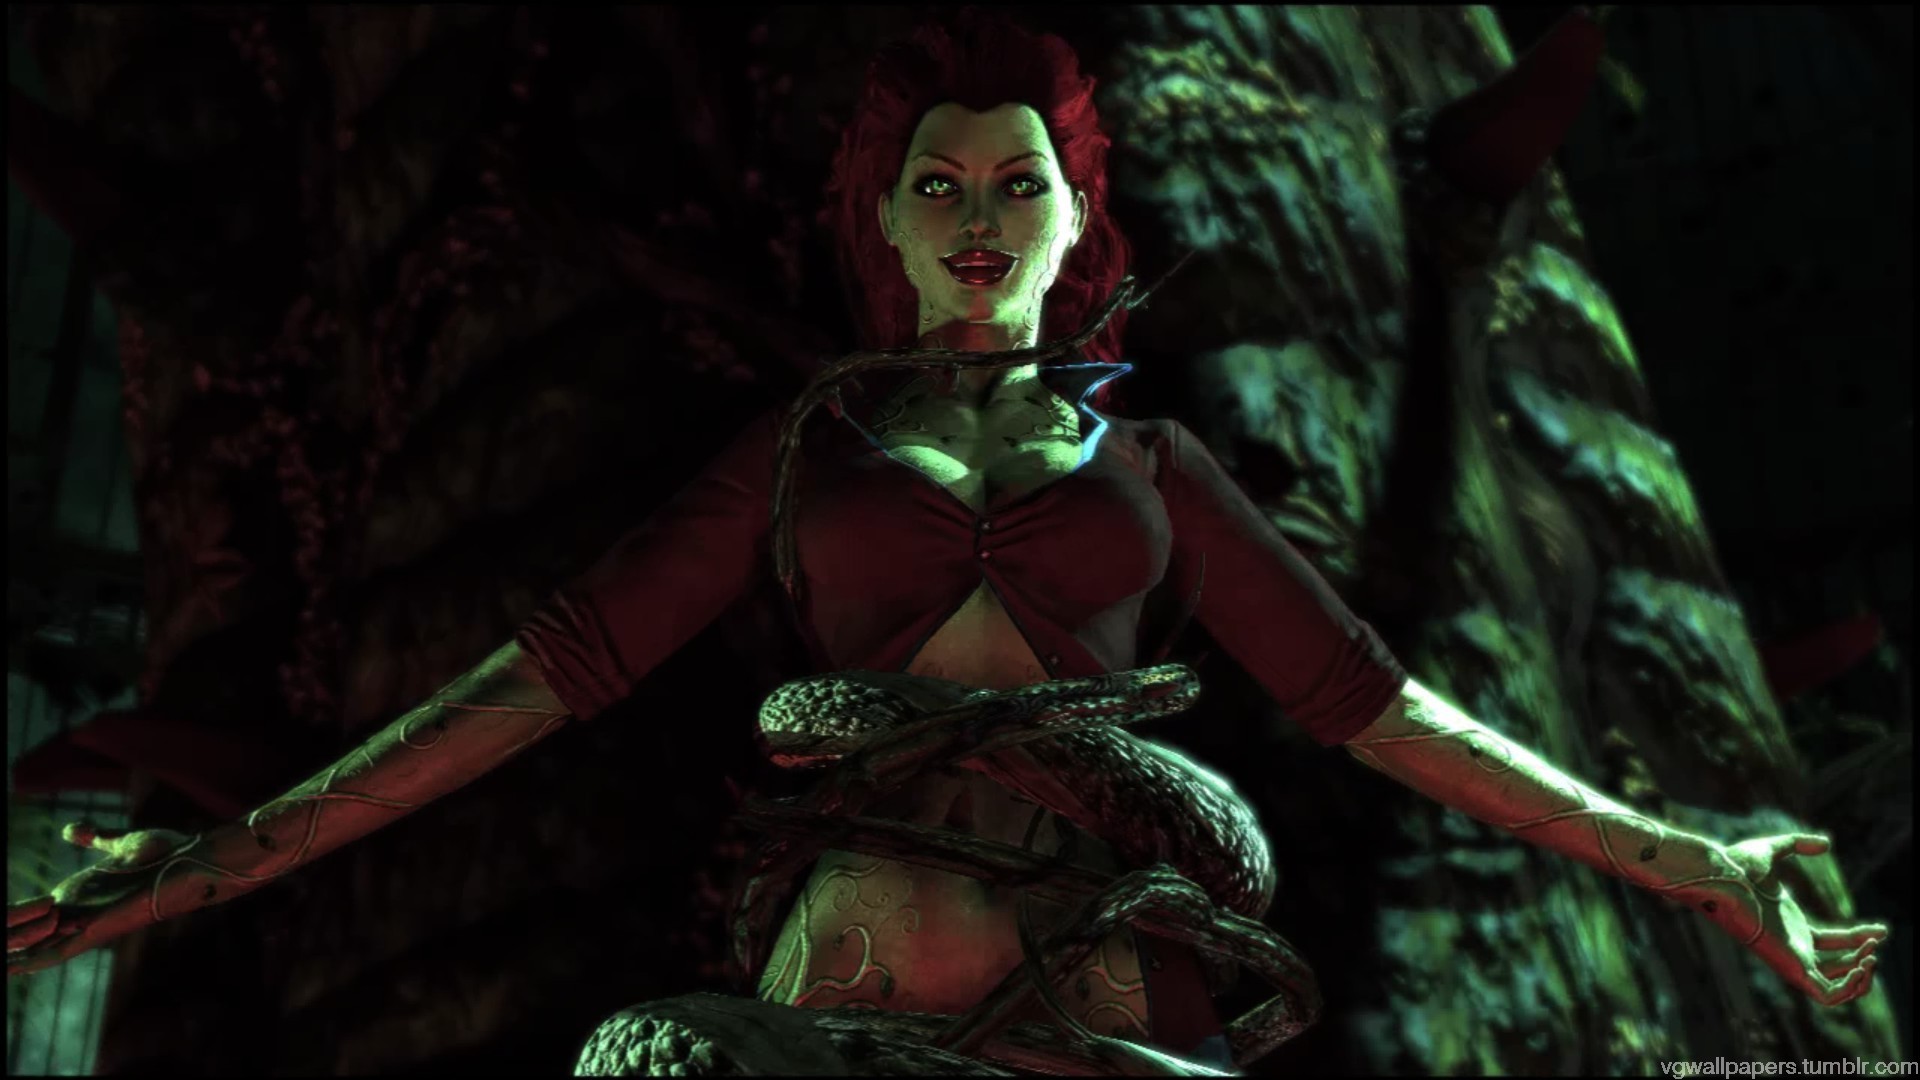 1920x1080 Poison Ivy - a screenshot from The Batman: Arkham Asylum Click image for  full 